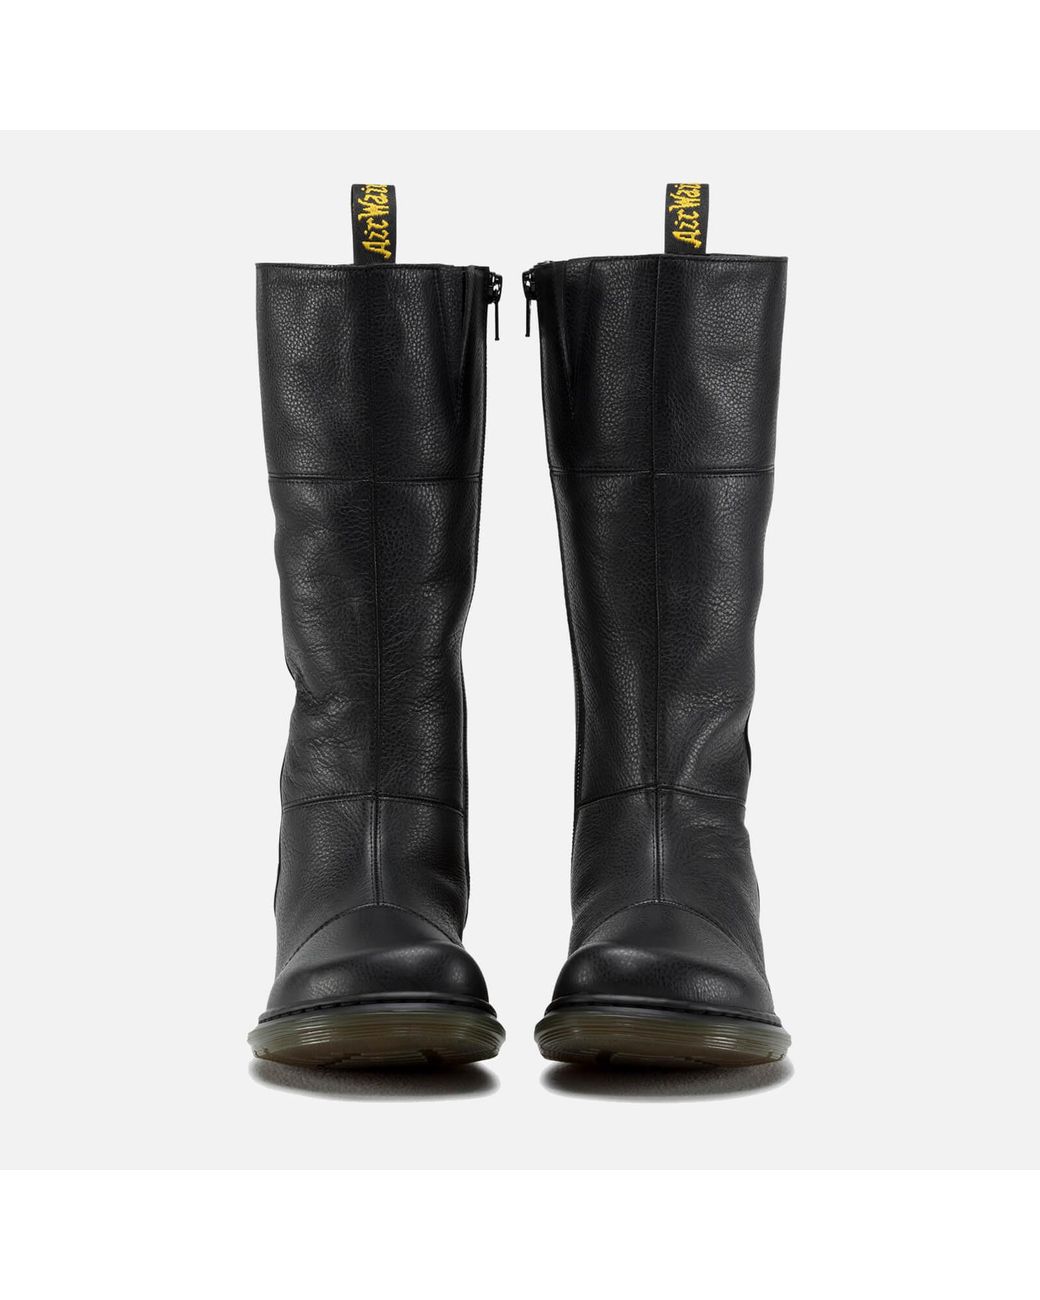 Dr. Martens Charla Broadway High Boots in Black | Lyst Canada